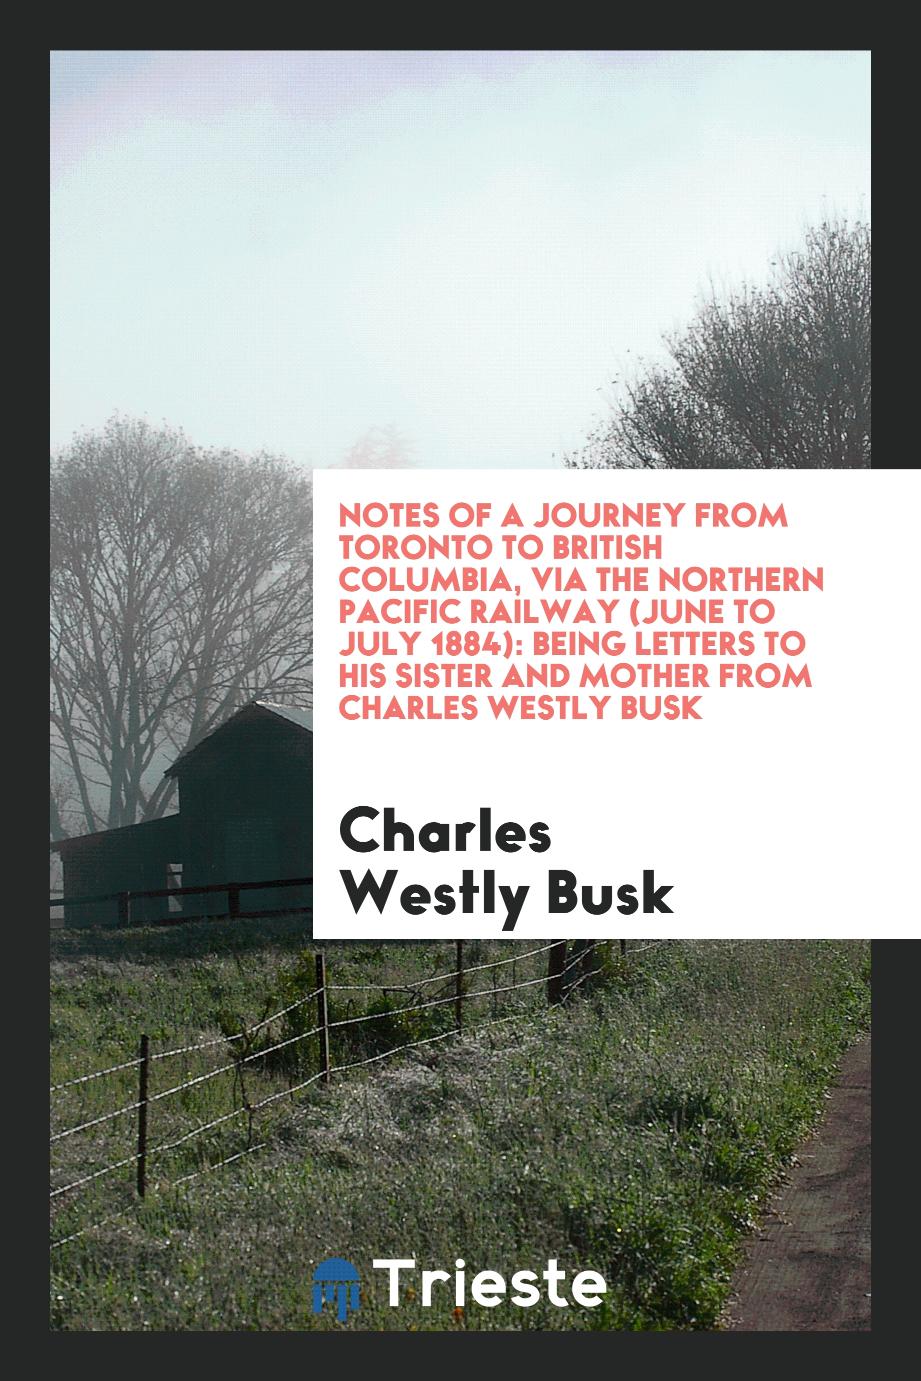 Notes of a journey from Toronto to British Columbia, via the Northern Pacific railway (June to July 1884): being letters to his sister and mother from Charles Westly Busk